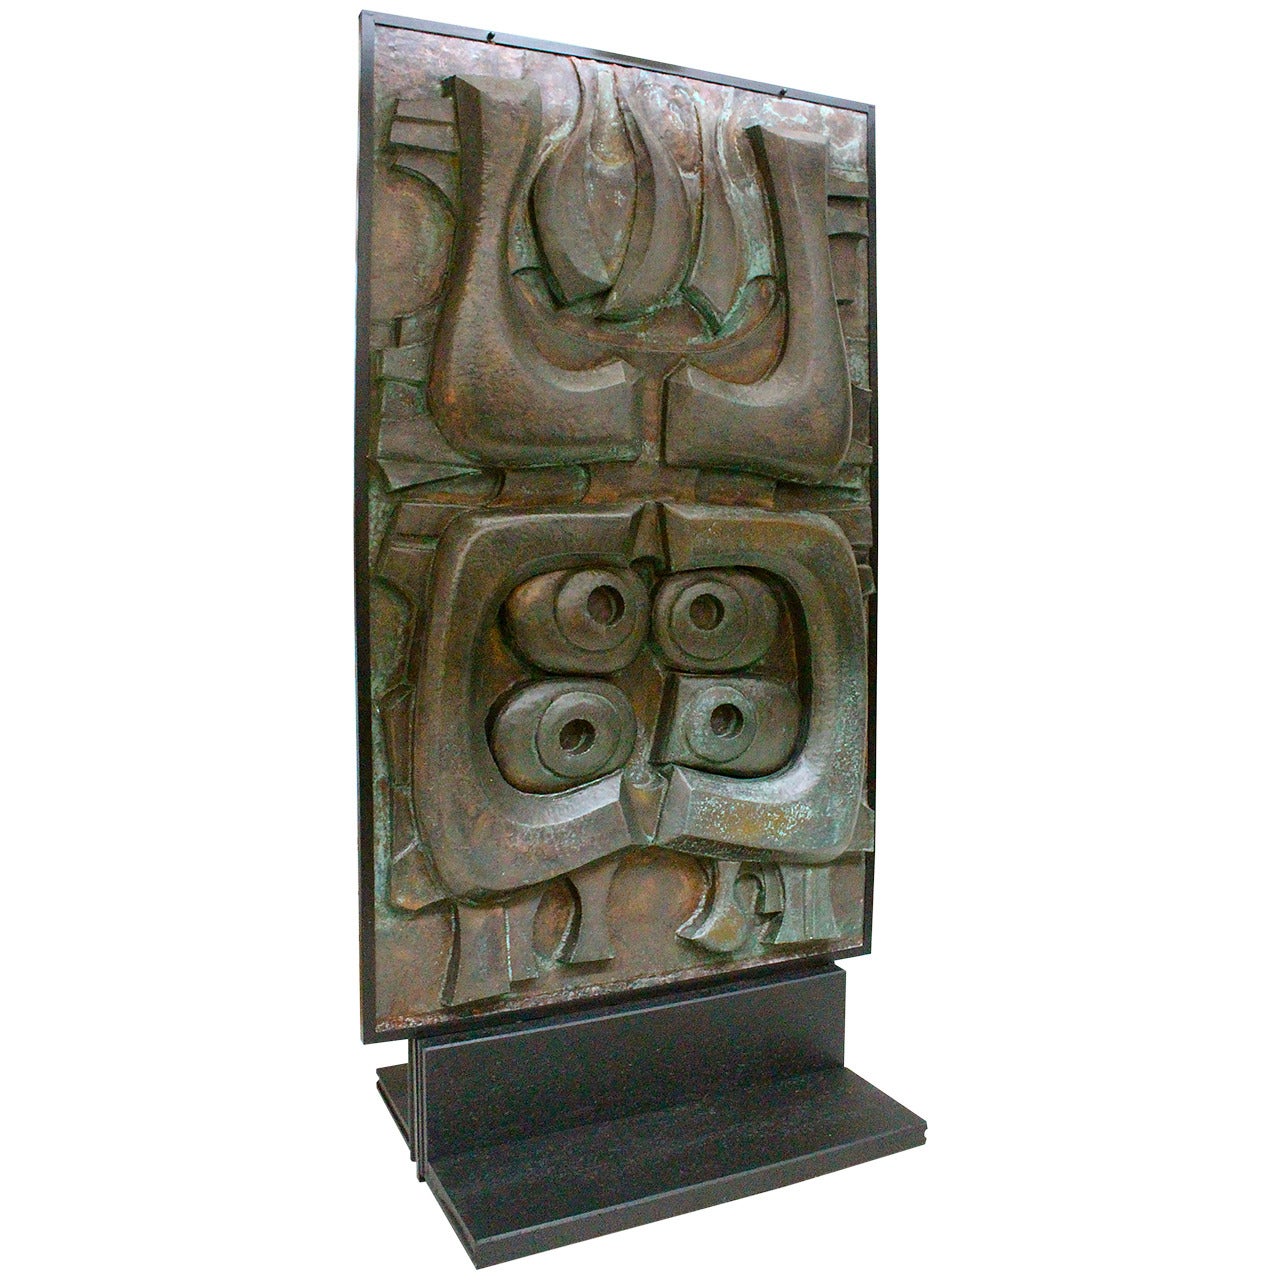 Very Big Brutalist Bronze Sculpture by Roland Monteyne, Dated and Signed 1973 For Sale